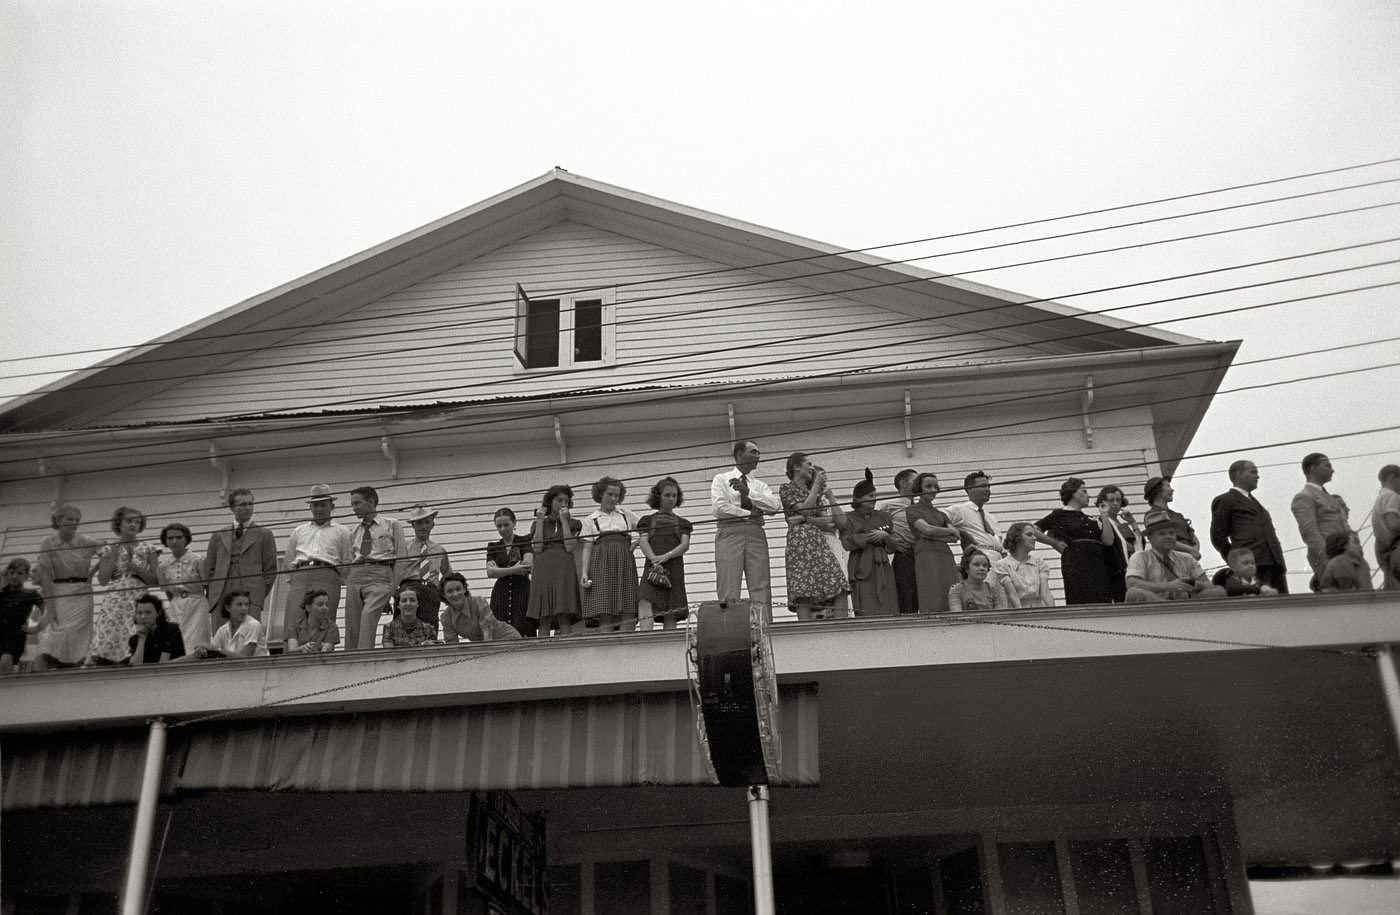 October 1938. "Group of people on roof watching parade at the National Rice Festival. Crowley, Louisiana." View full size. 35mm nitrate negative by Russell Lee for the Farm Security Administration. Library of Congress.